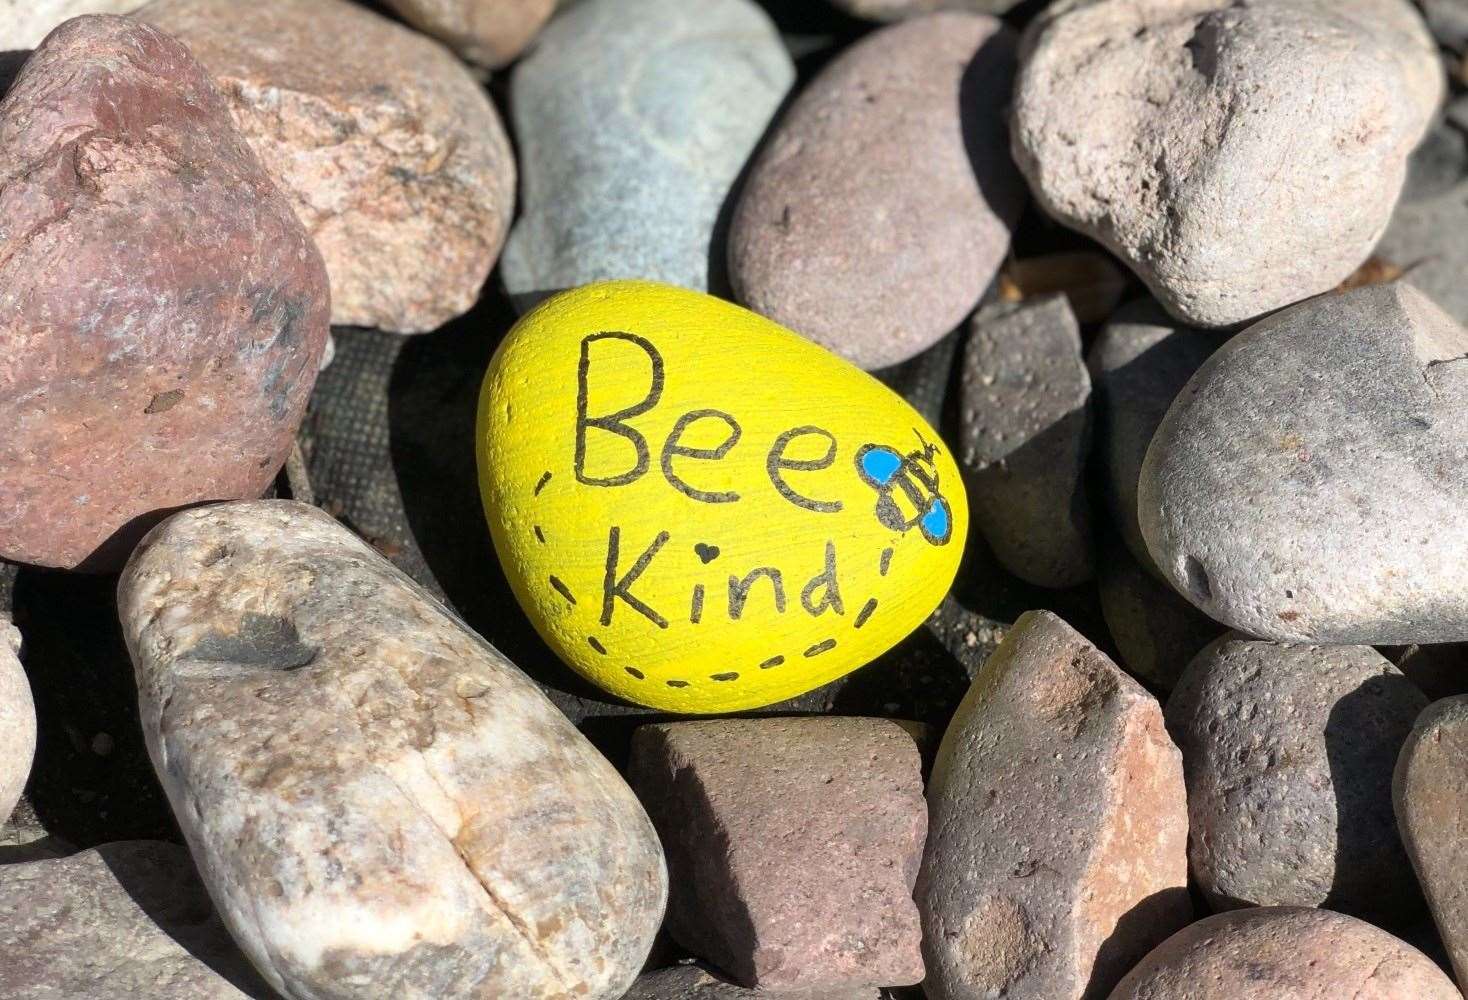 It's important to remember to be kind.